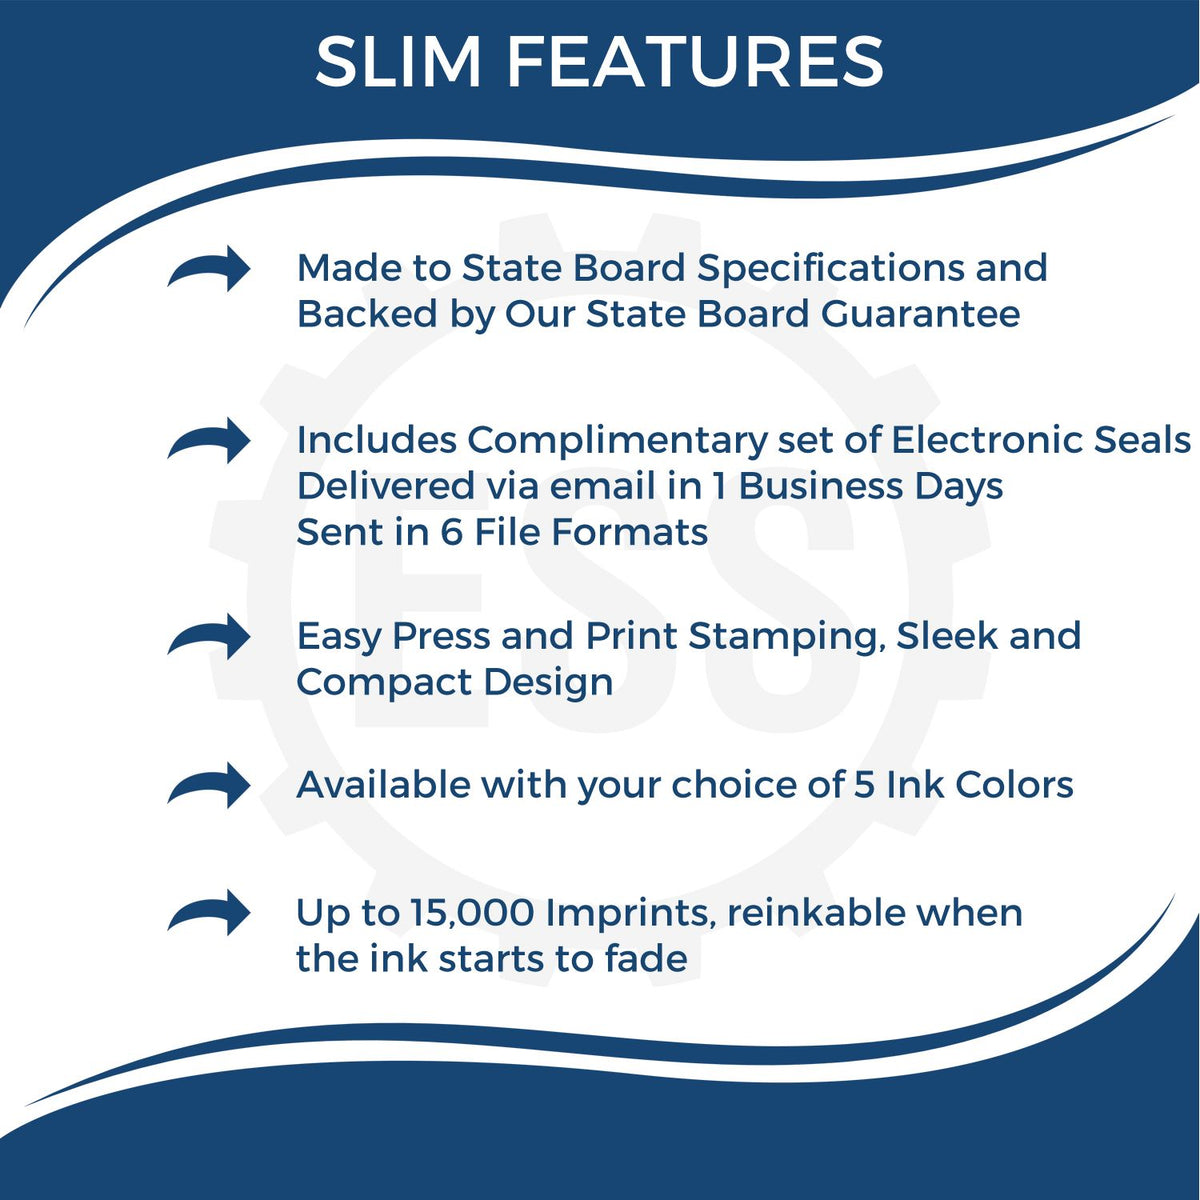 A picture of an infographic highlighting the selling points for the Slim Pre-Inked South Dakota Architect Seal Stamp